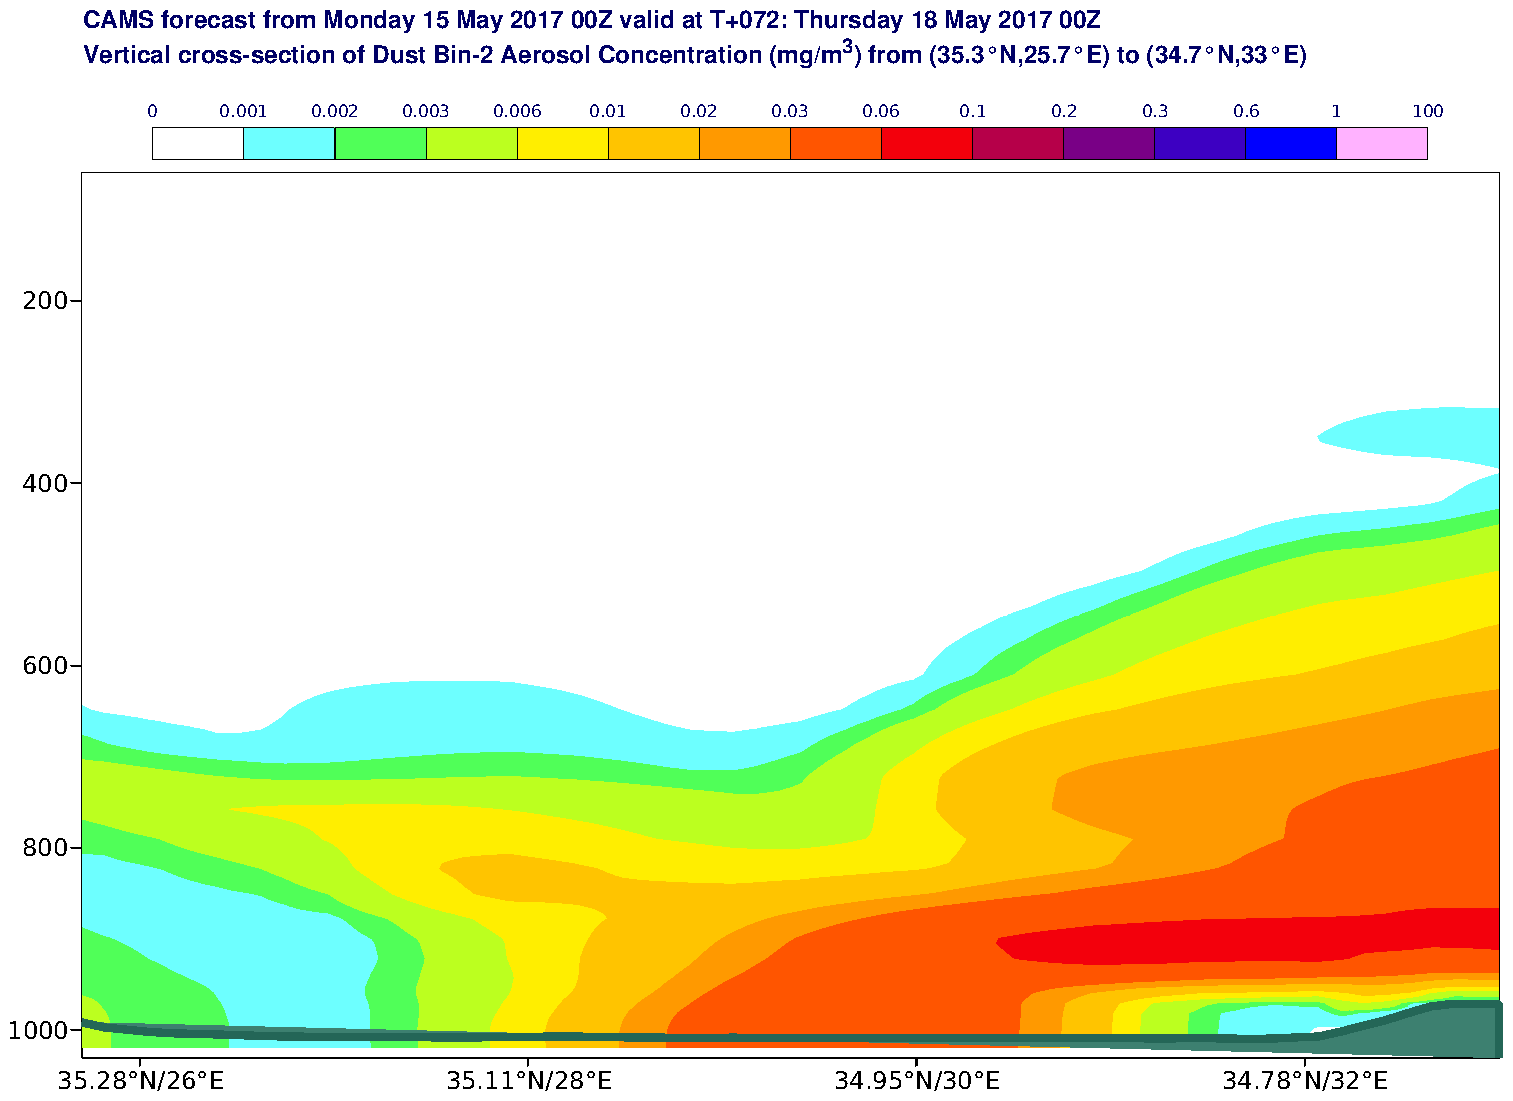 Vertical cross-section of Dust Bin-2 Aerosol Concentration (mg/m3) valid at T72 - 2017-05-18 00:00